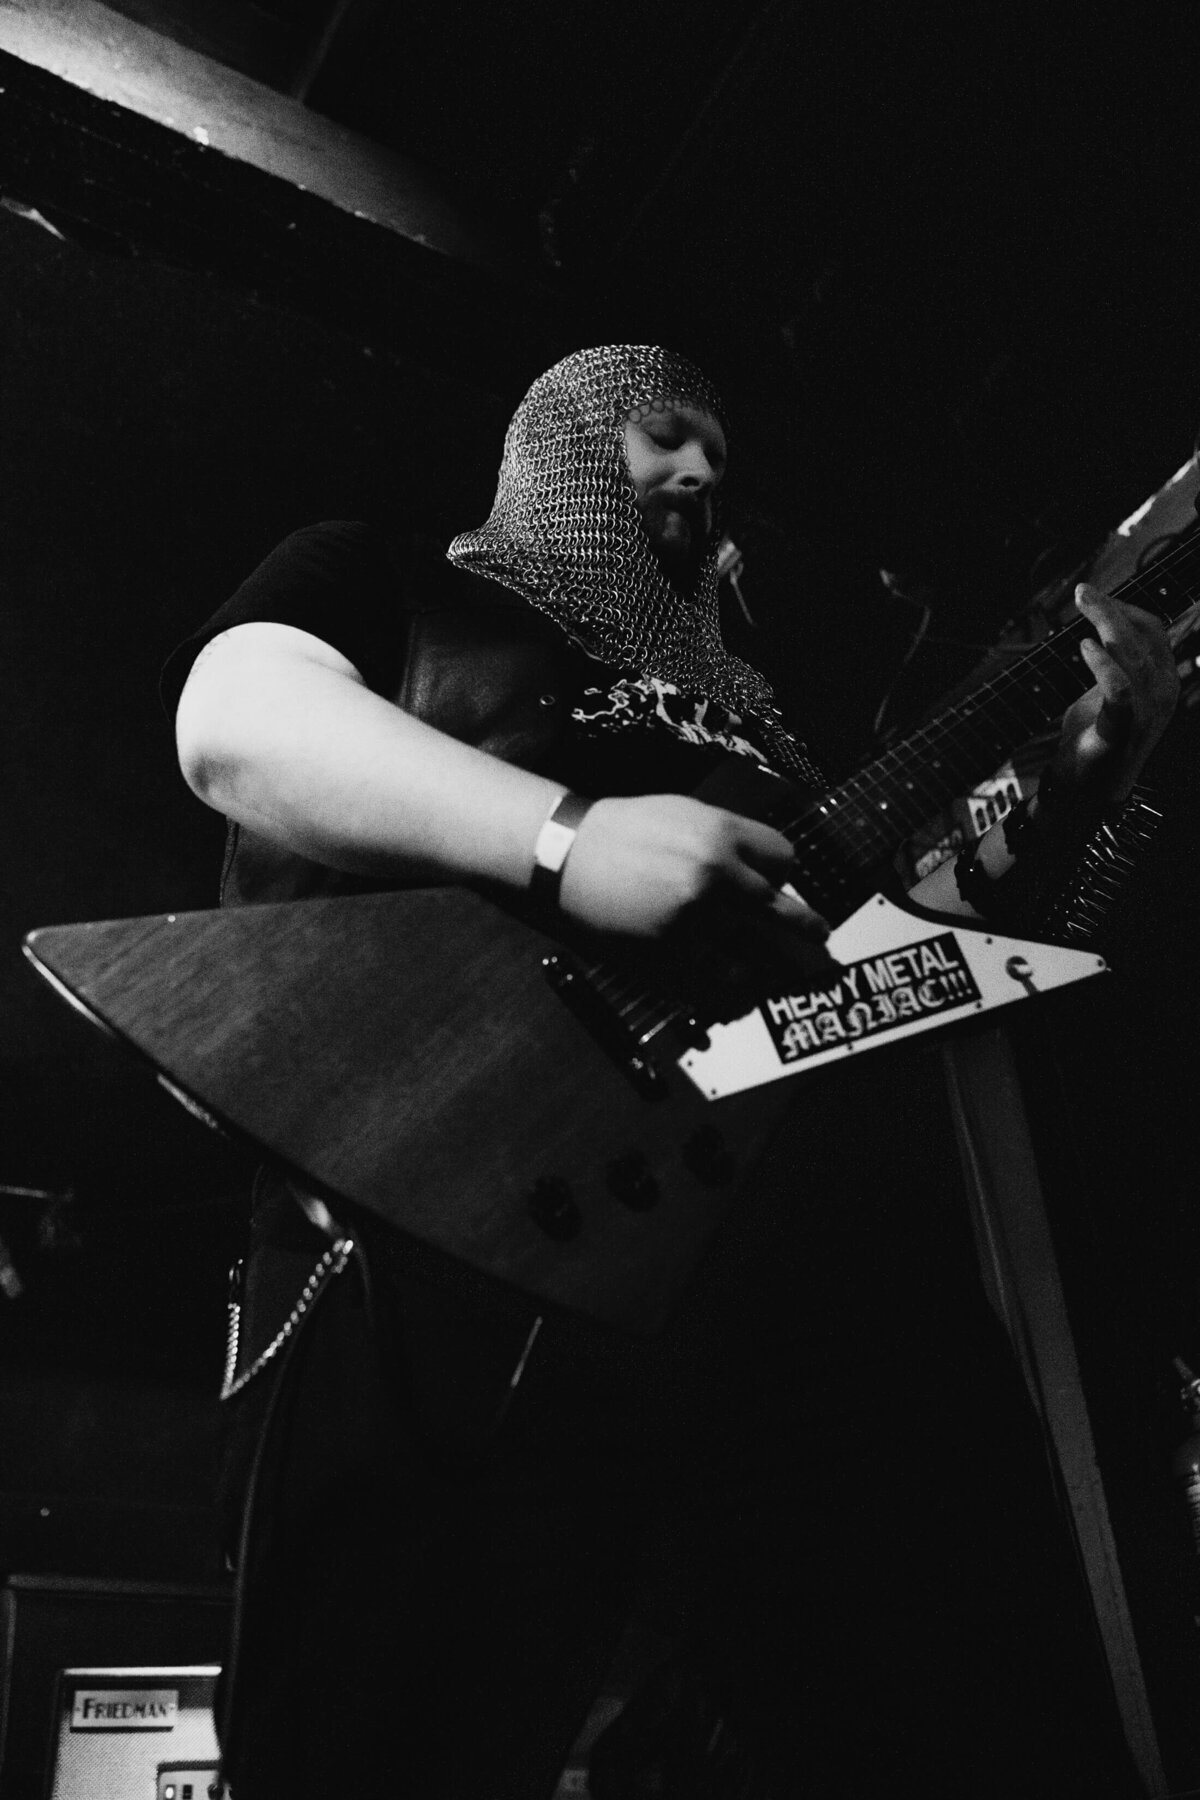 Live music photography in Columbia, SC in black and white